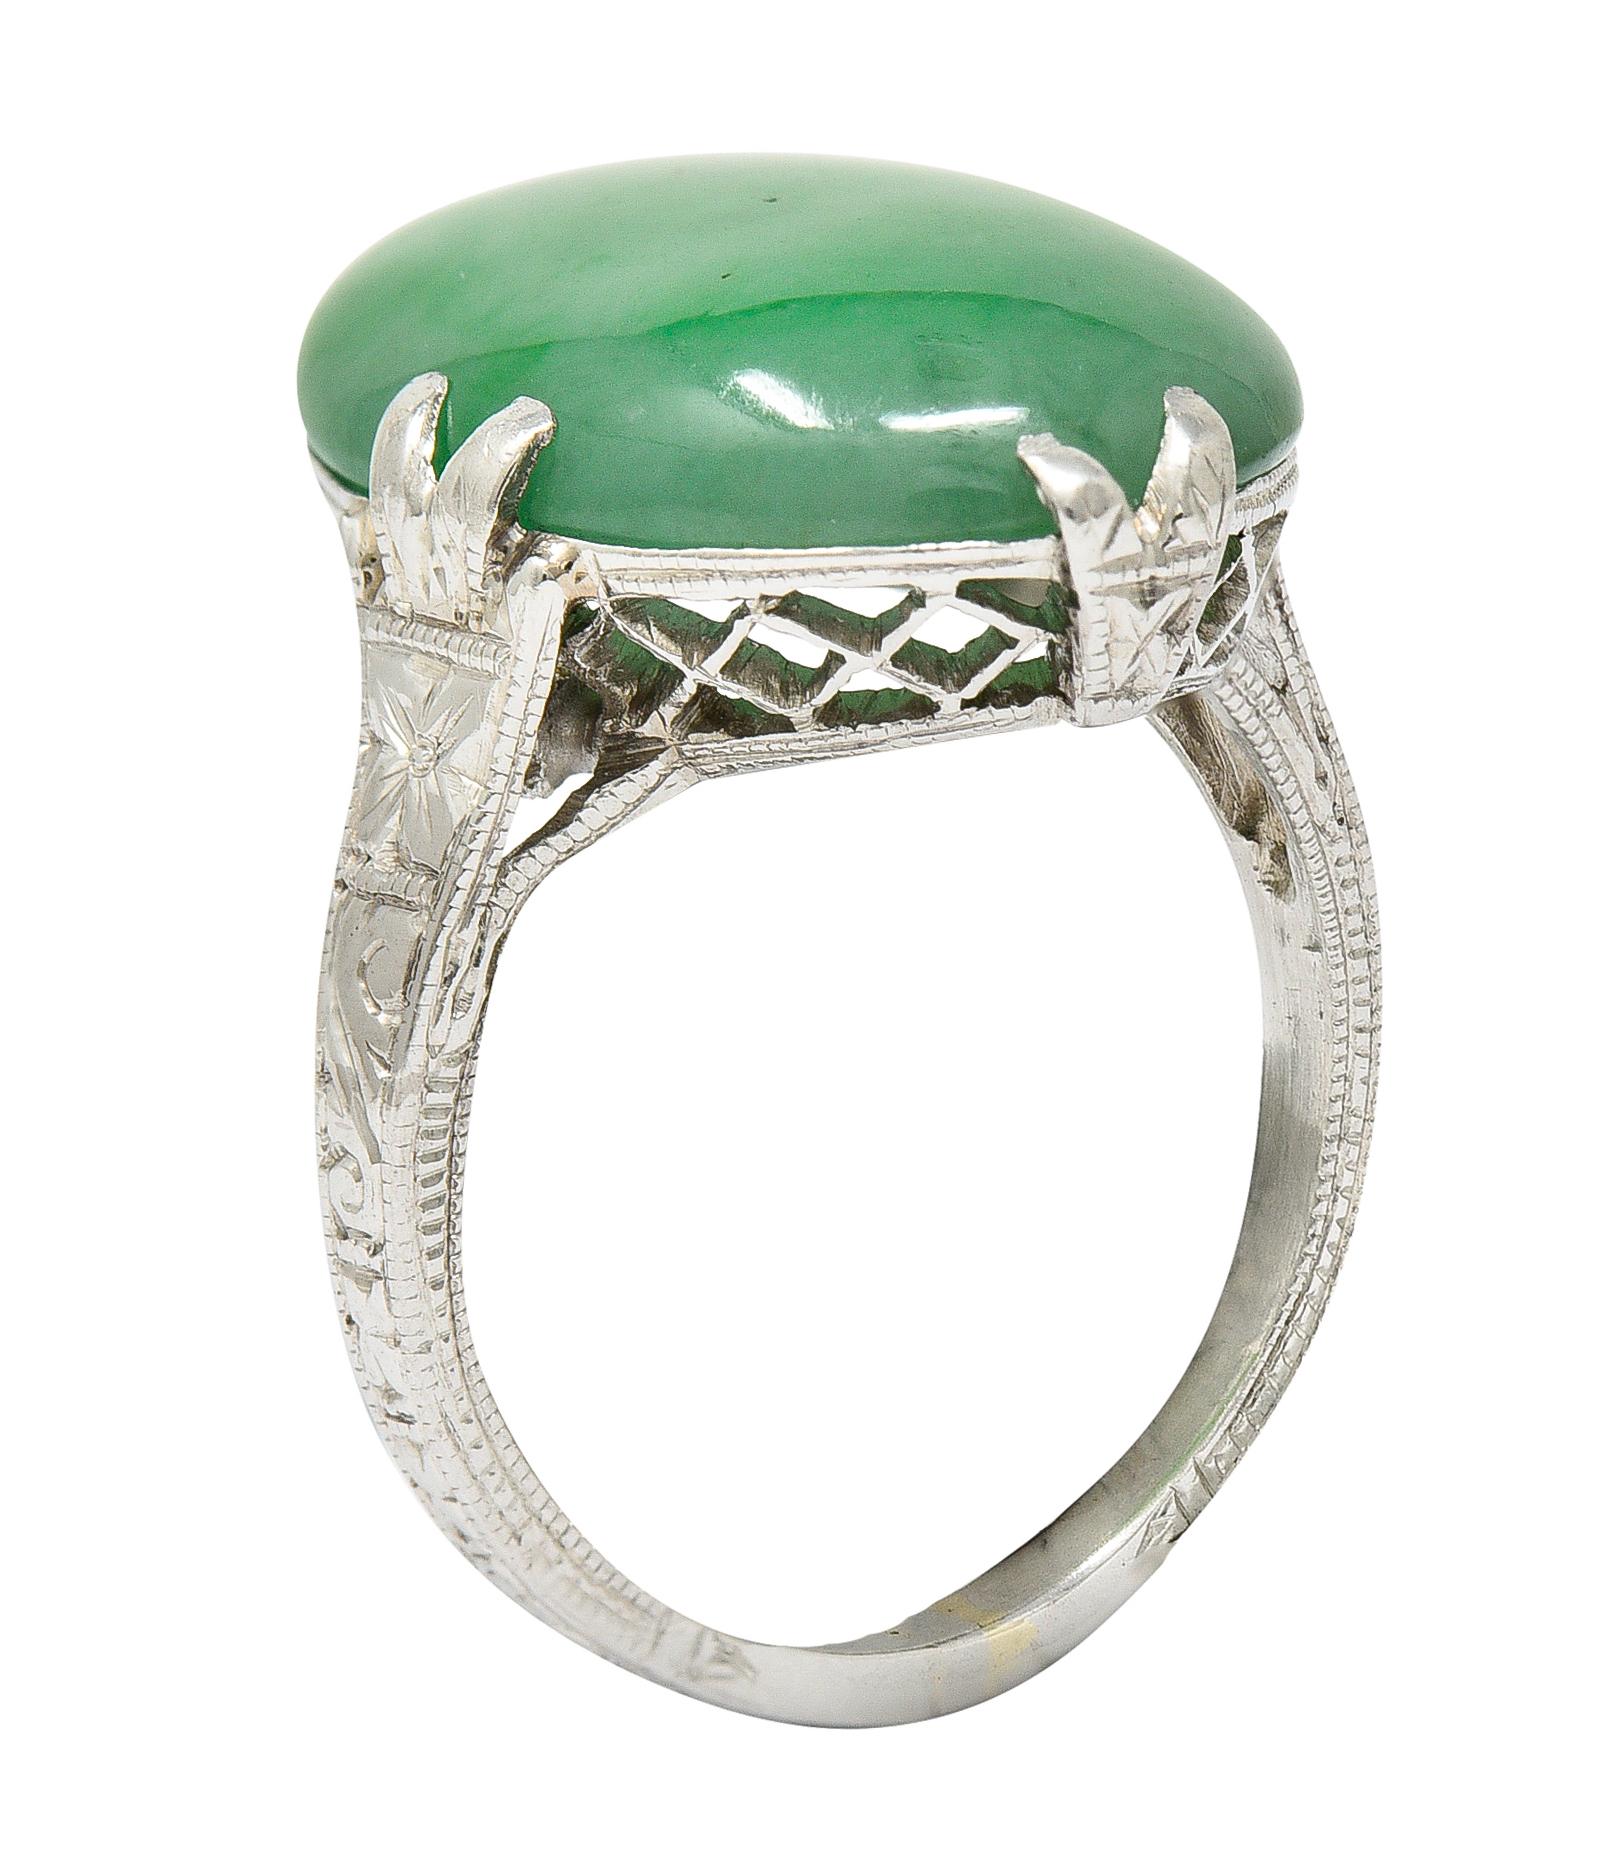 Featuring an oval jade cabochon measuring approximately 15.5 x 11.5 mm. Translucent and moderately mottled green to light pastel green. Set by split prongs with a pierced trellis motif gallery. Shoulders and shank are engraved with a stylized and